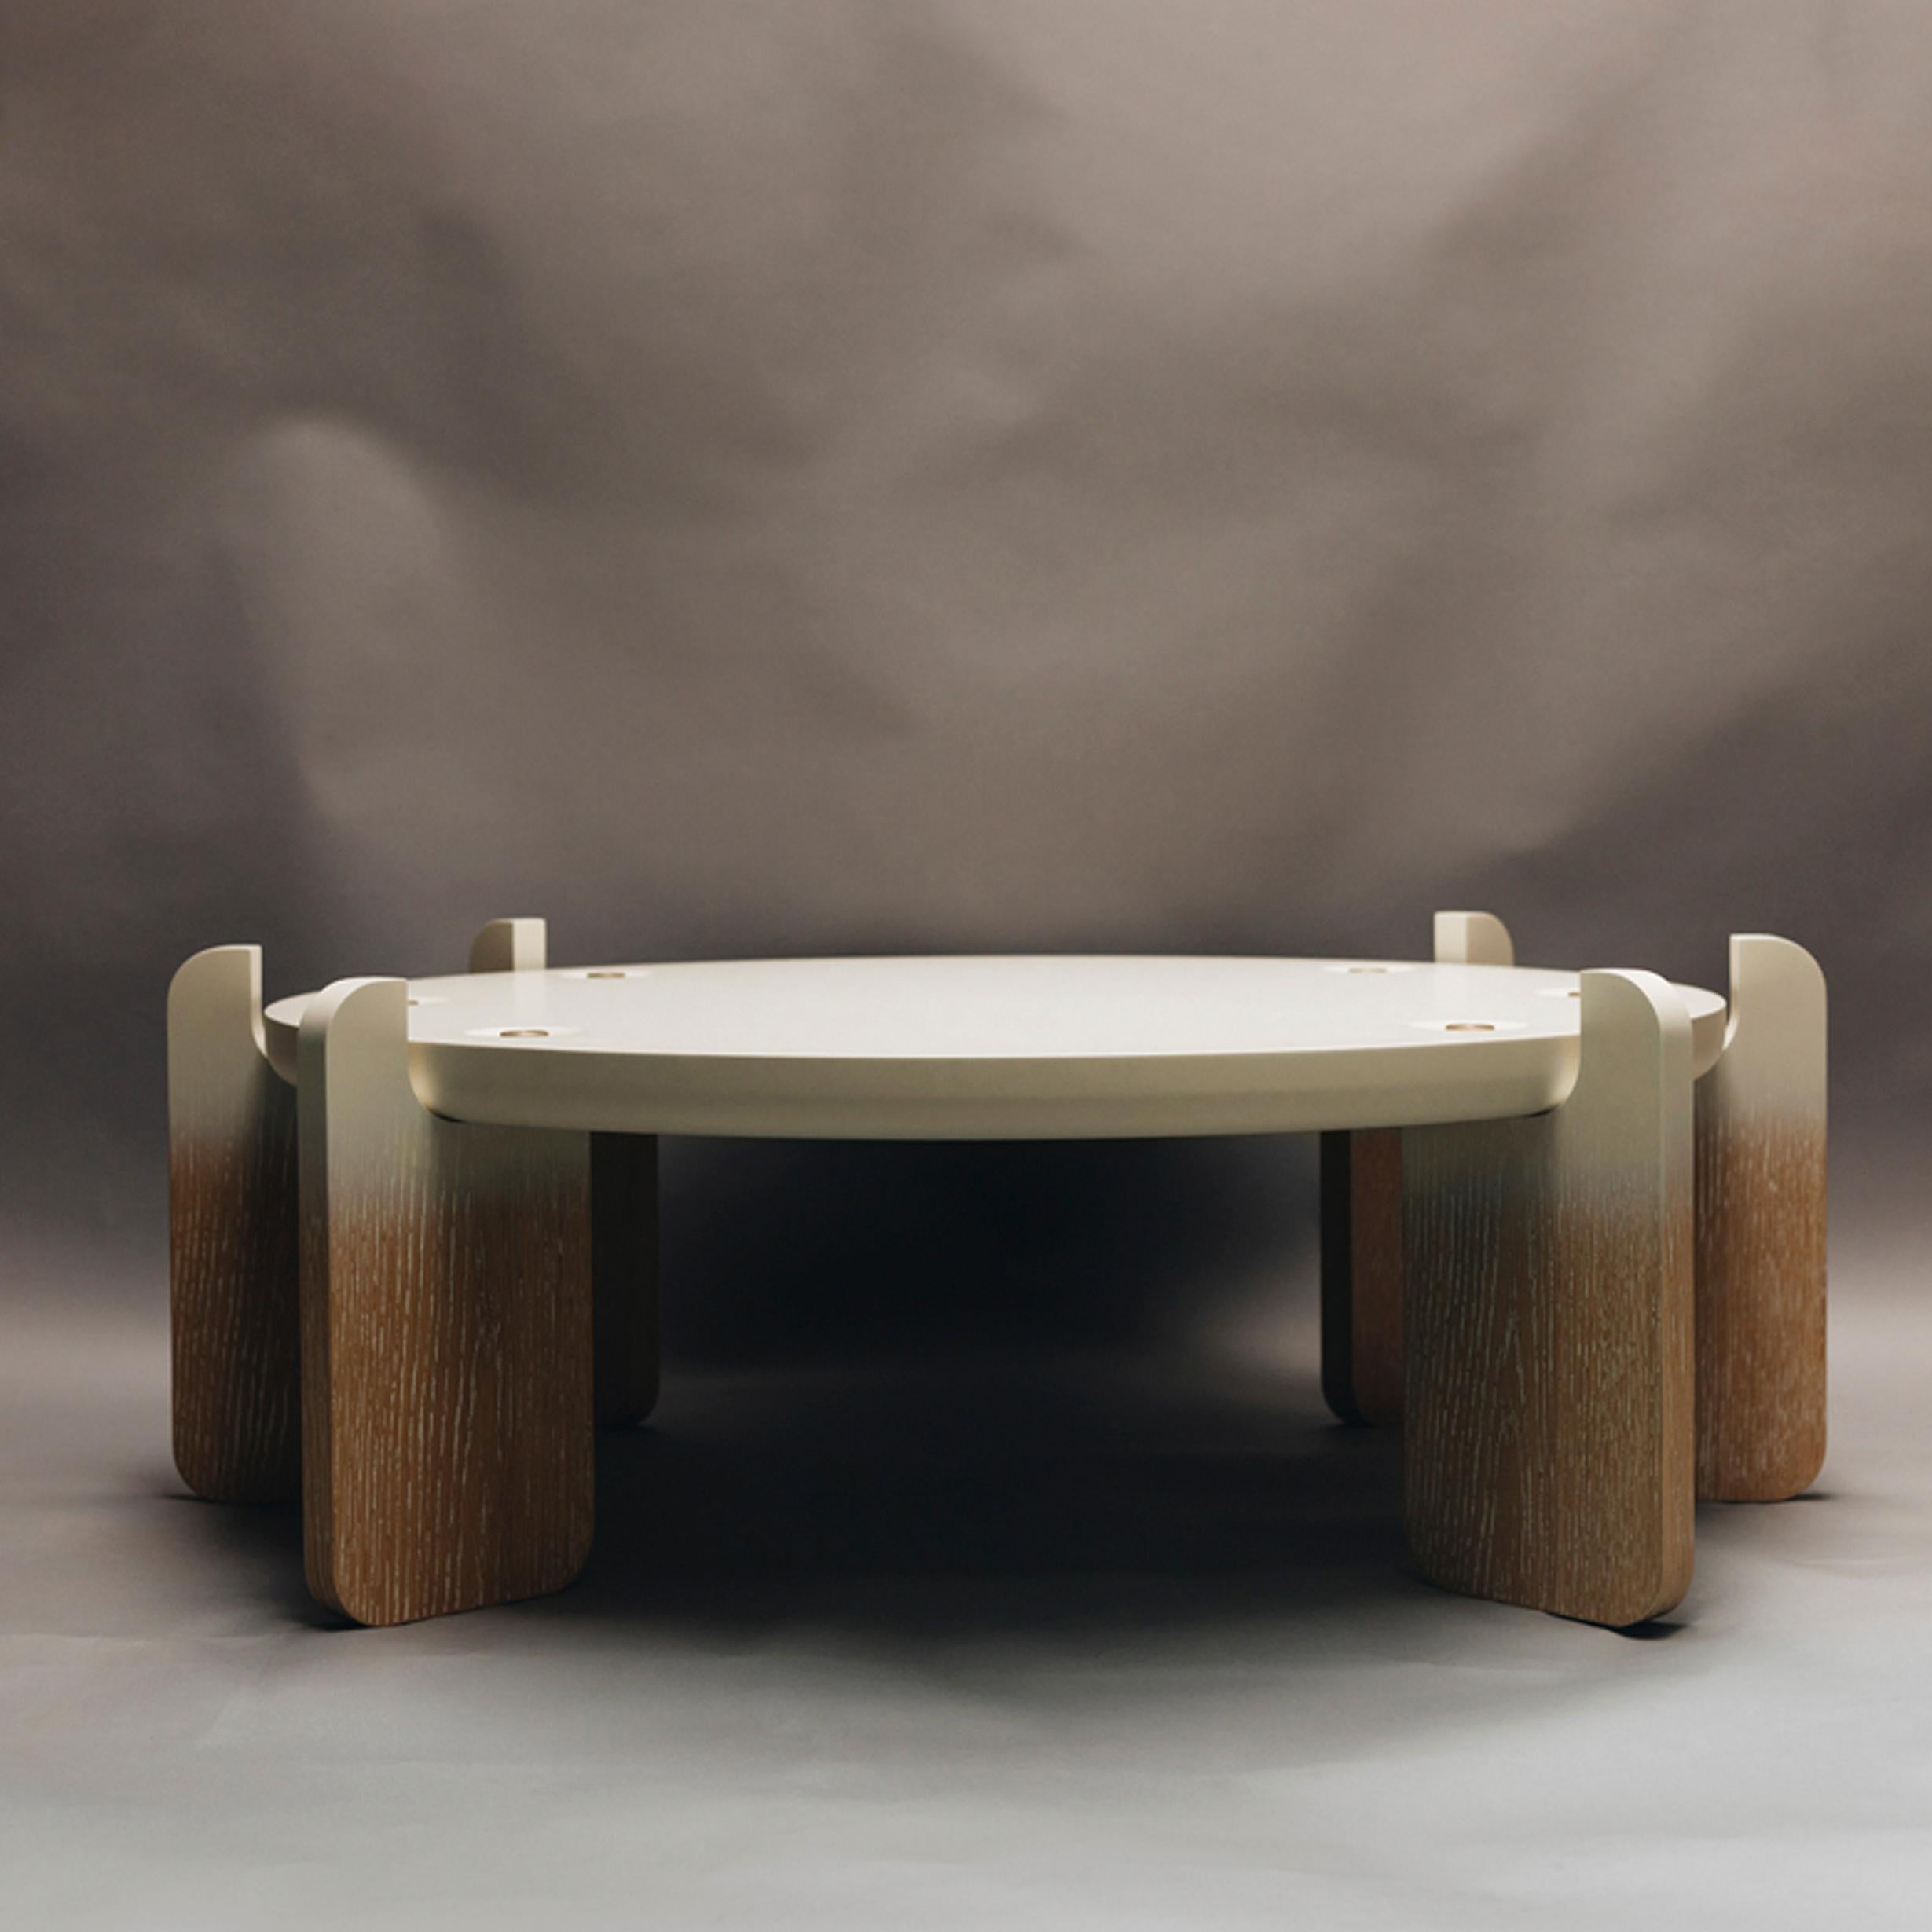 Ipanema Coffee and Side Table Set, Limed Oak with Ombre Effect, by Duistt

The rounded geometric shapes of the ipanema series refer to the imagination of the well-known sidewalk in Rio de Janeiro. We wanted to invest in fresh finishes, with colours